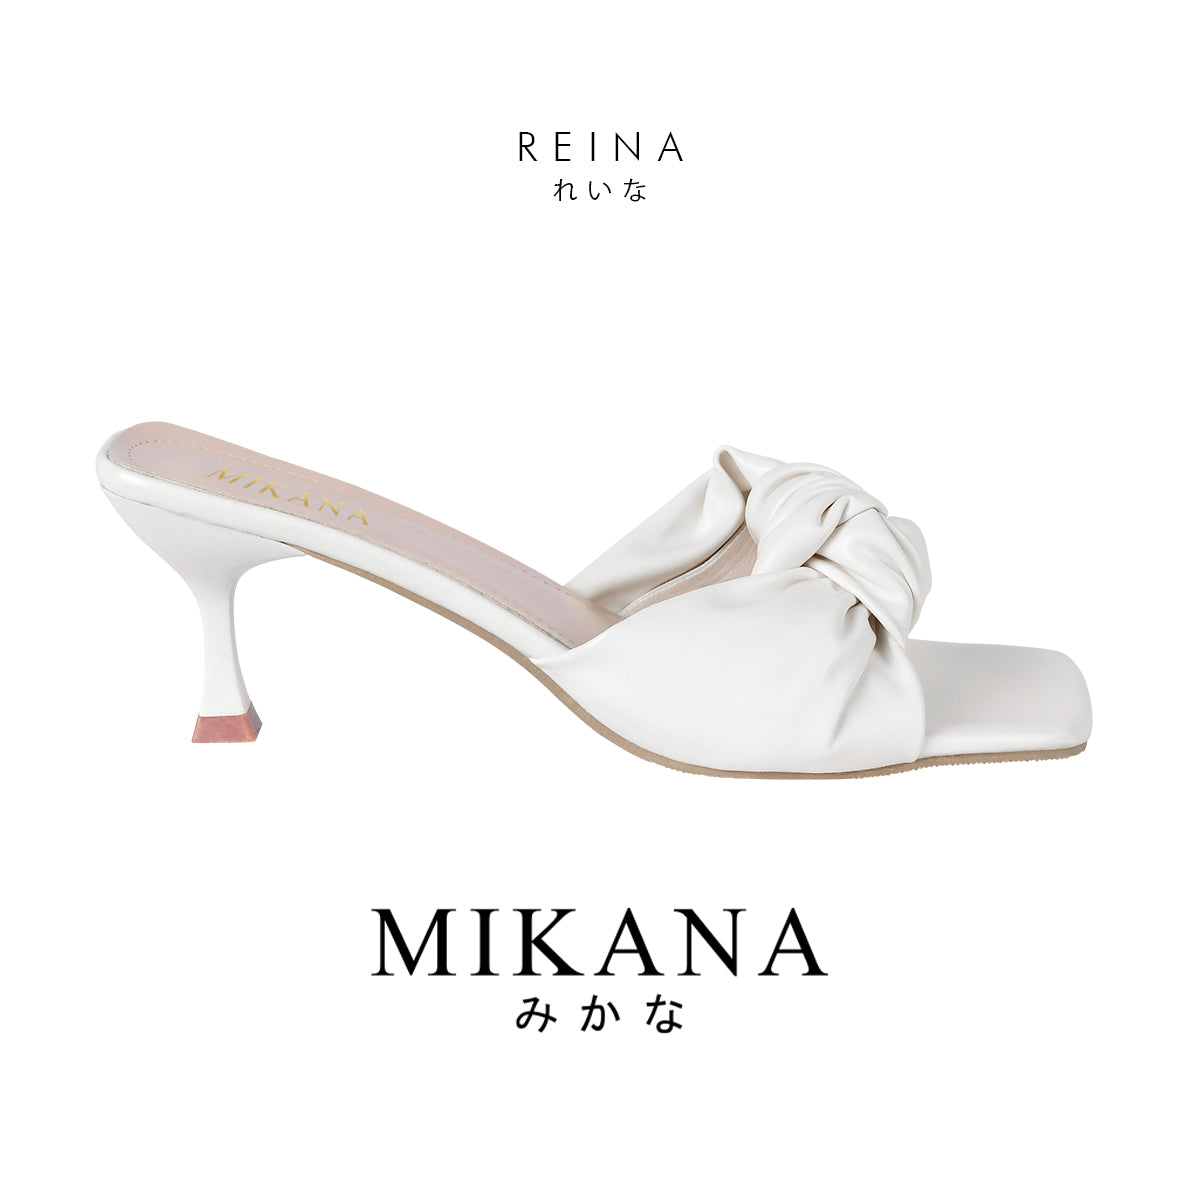 Reina Knot Slides 2.5 inches Heels Sandals Shoes